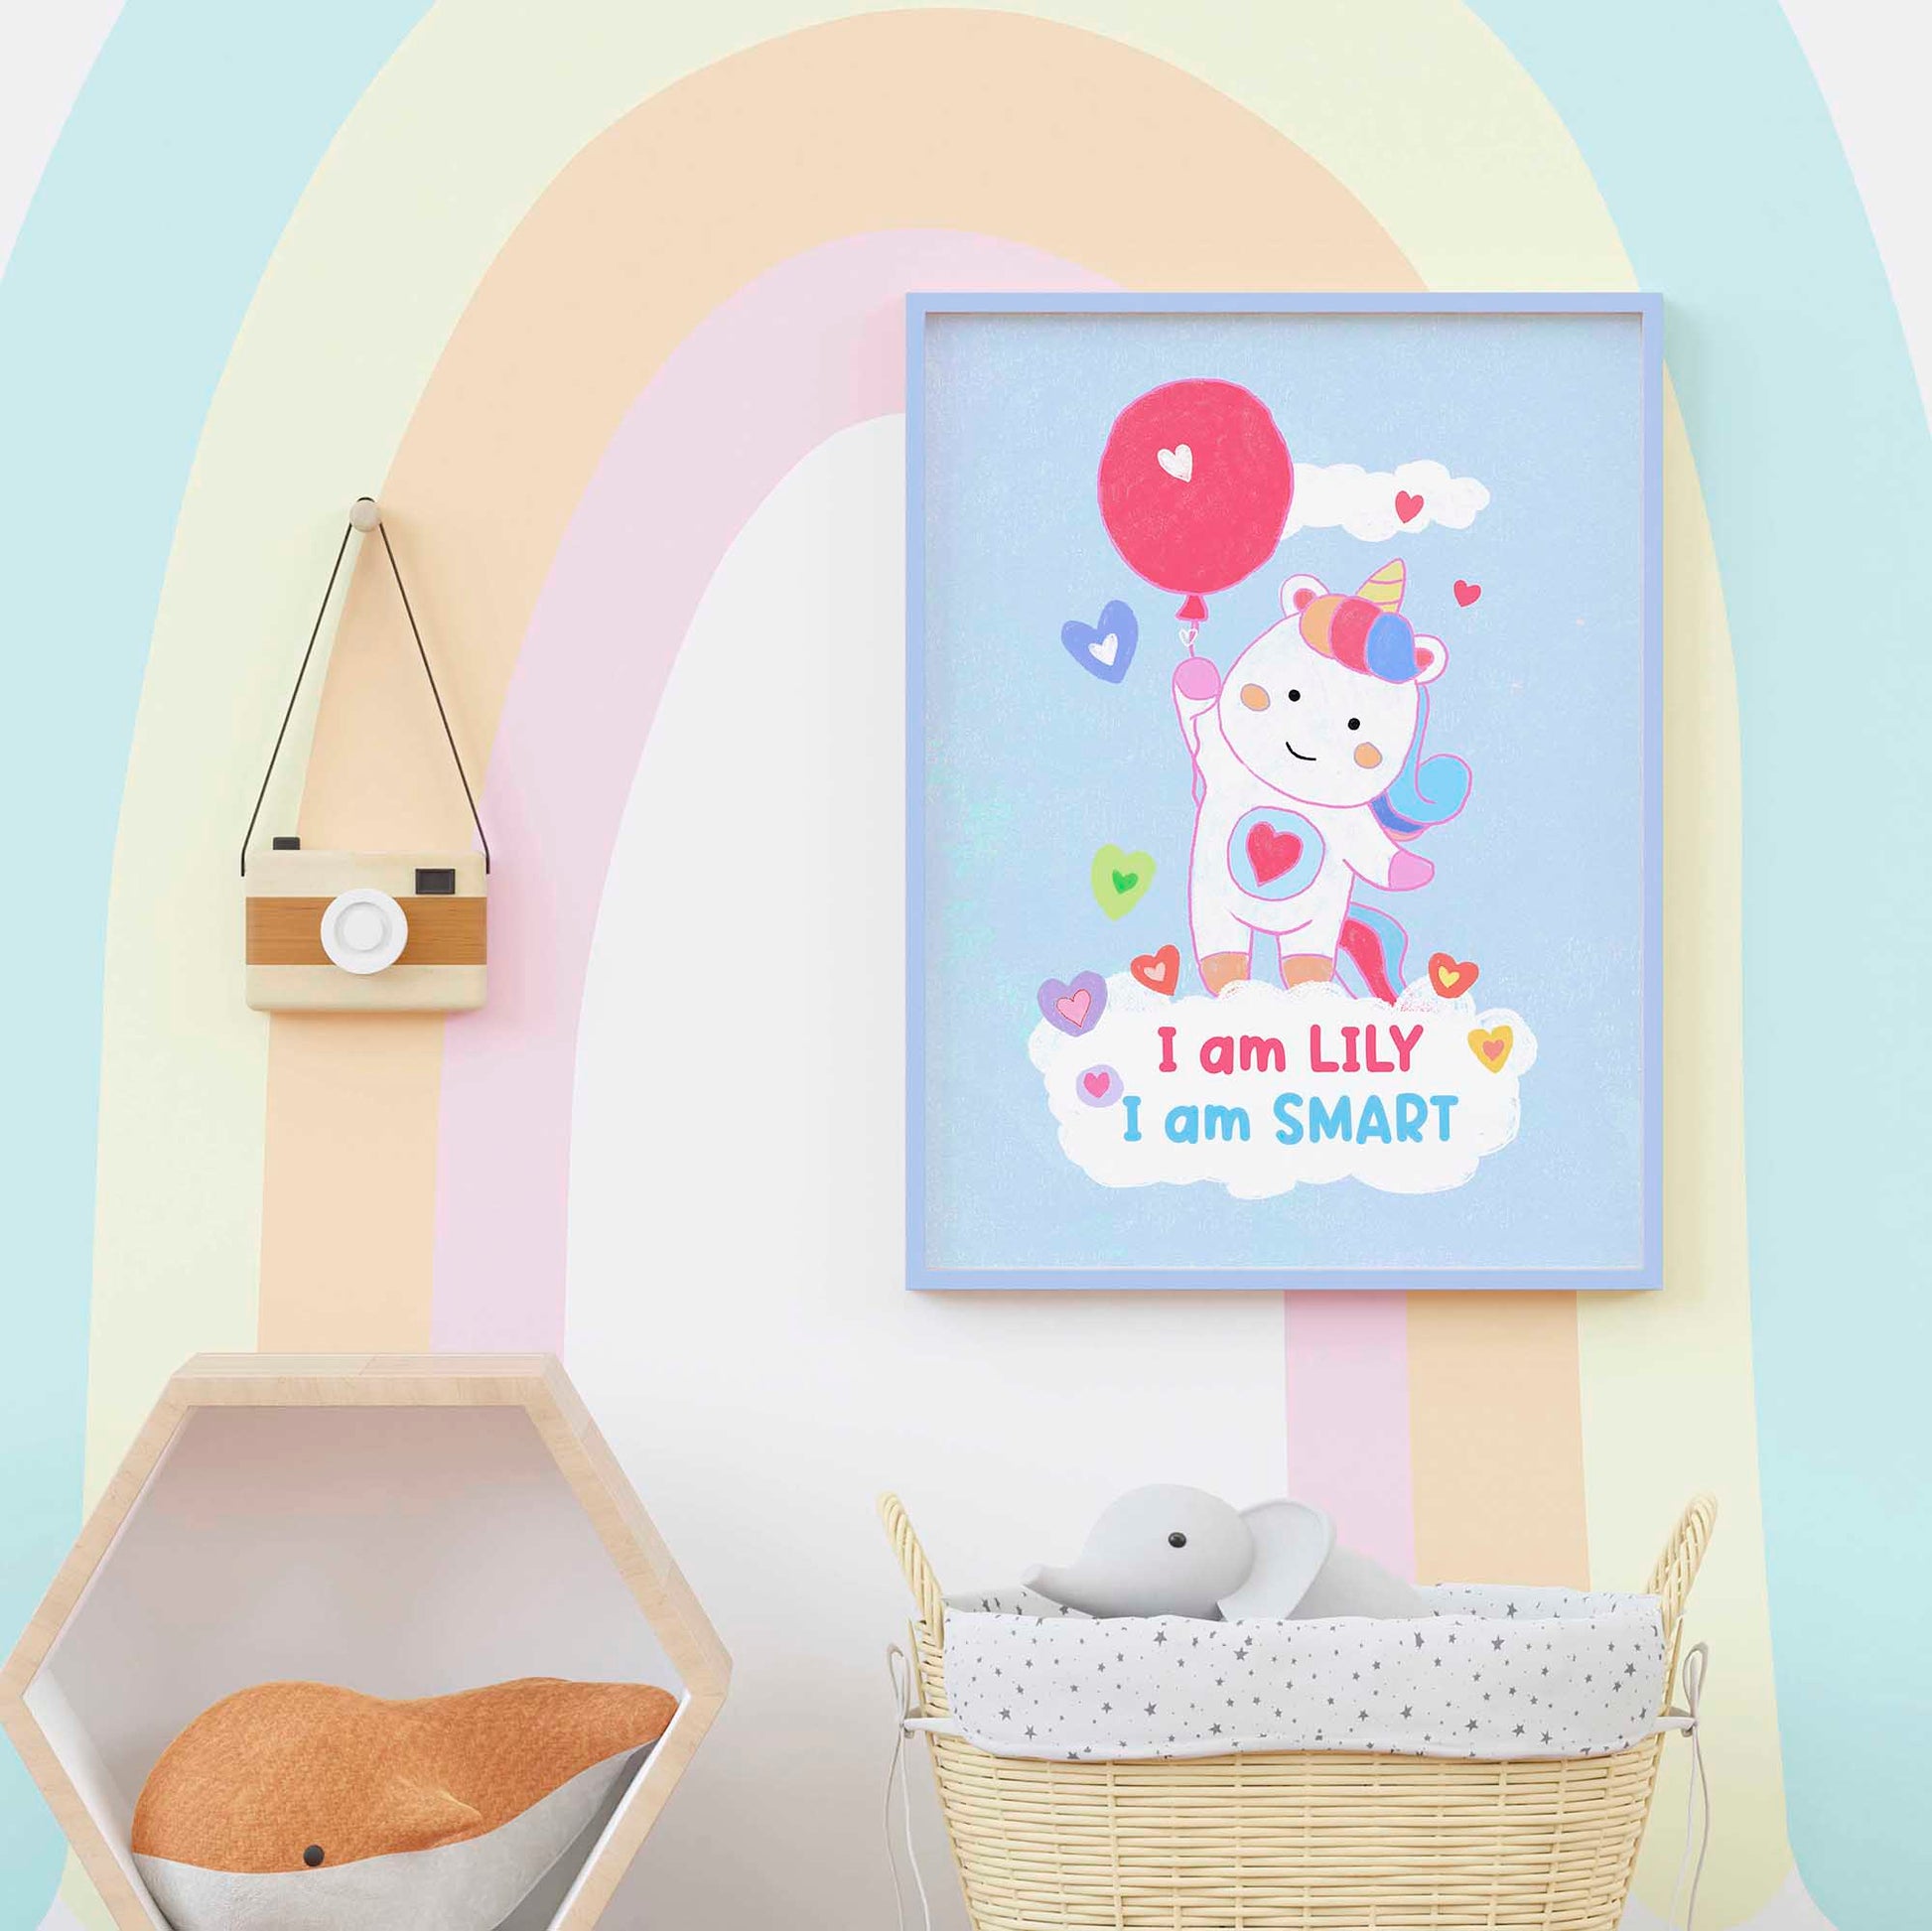 "Playful unicorn wall art for decorating nursery spaces, featuring uplifting messages for kids."